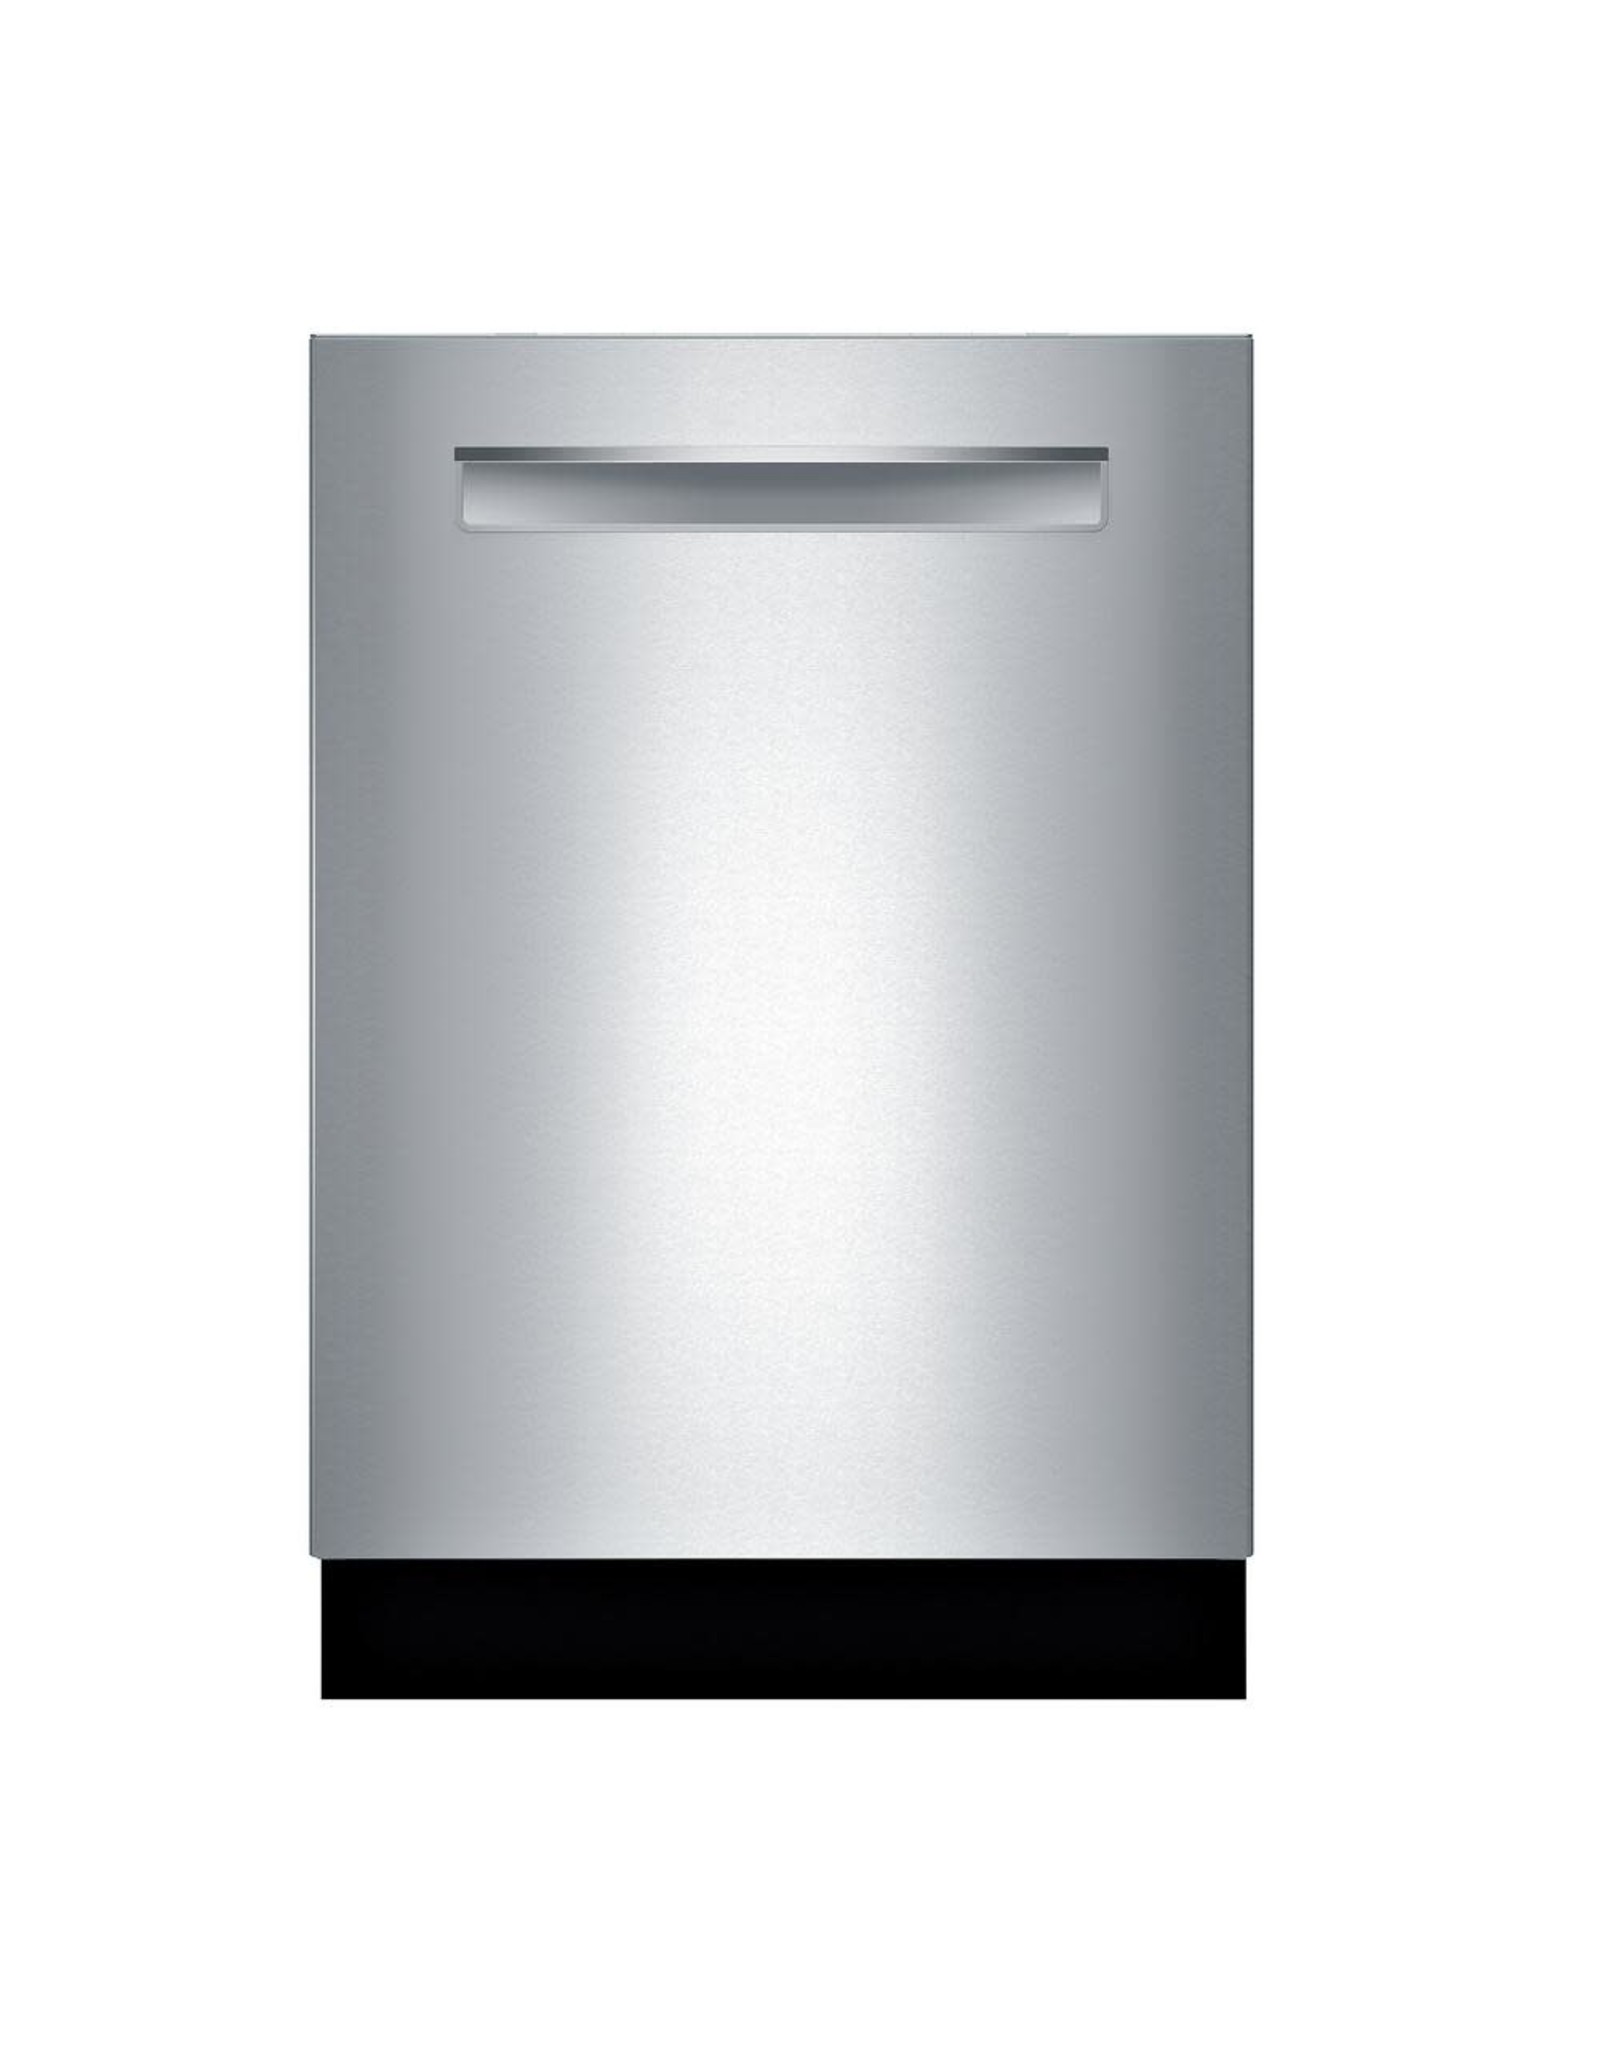 BOSCH SHPM65Z55N Bosch 500 Series Top Control Tall Tub Pocket Handle Dishwasher in Stainless Steel with Stainless Steel Tub, AutoAir, 44dBA